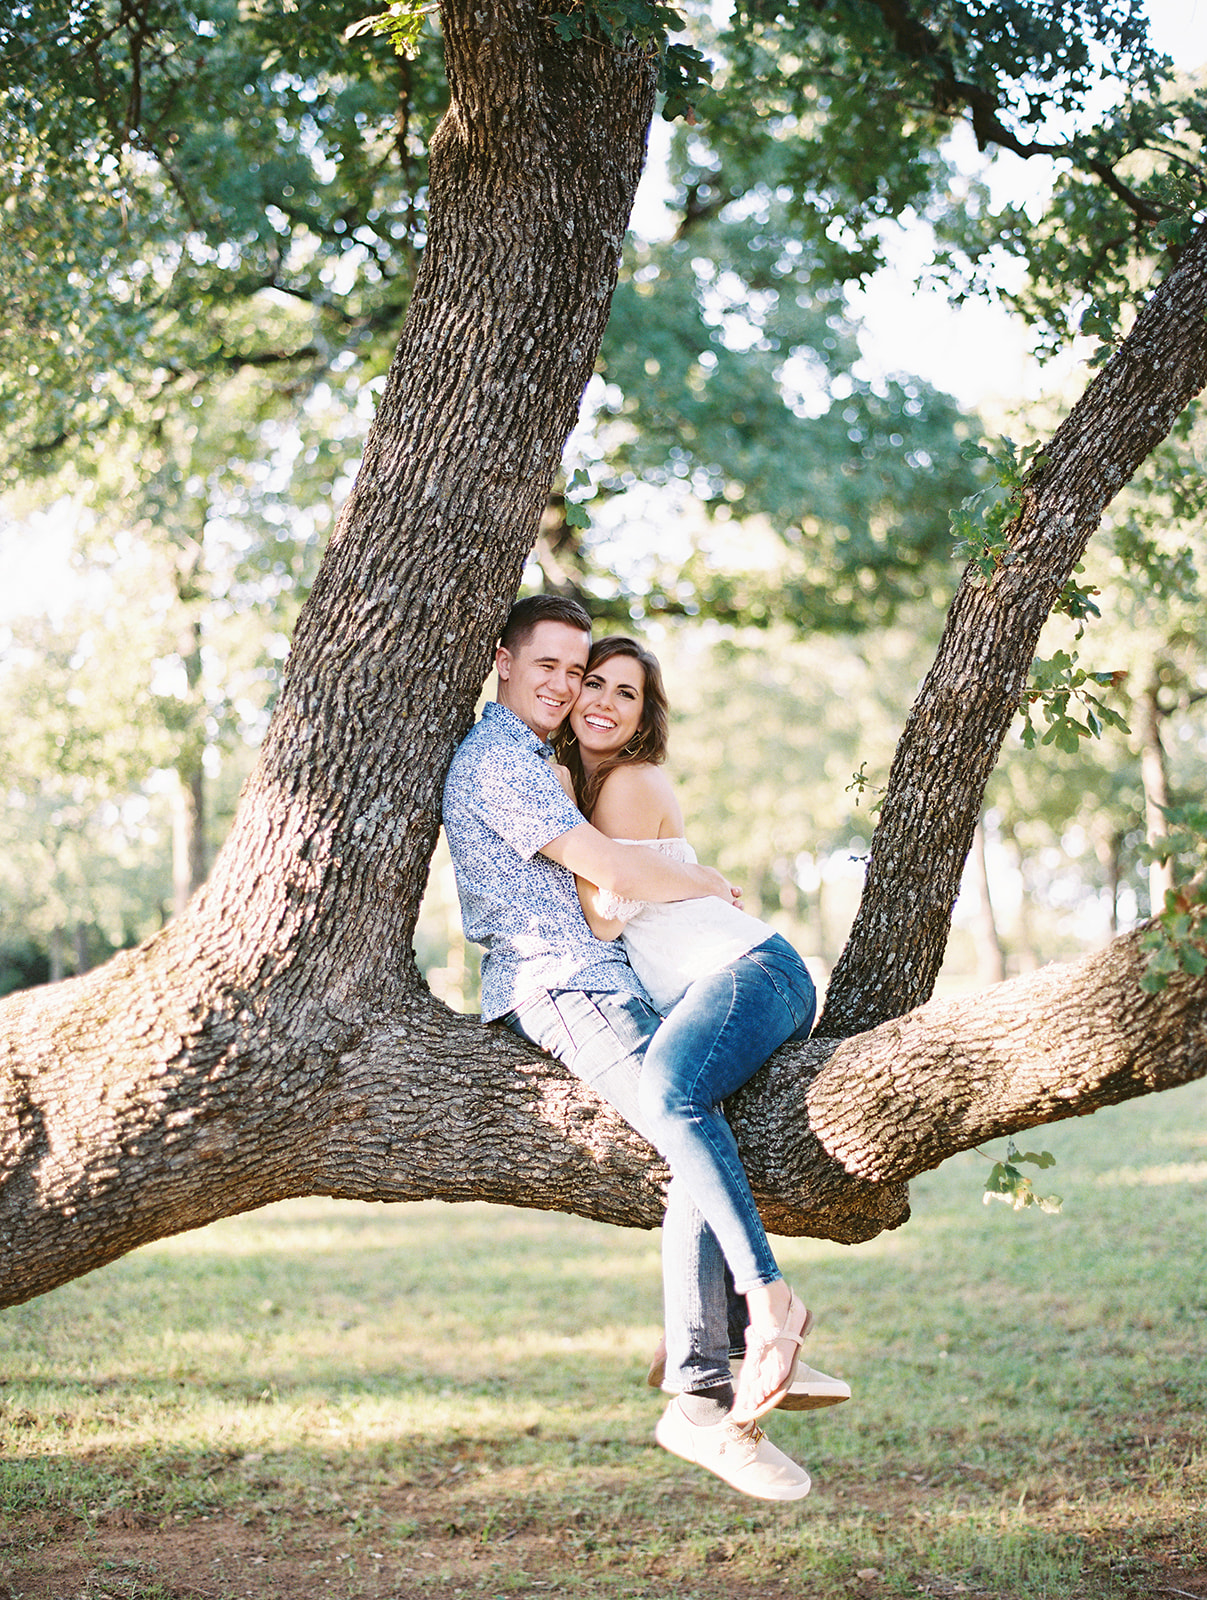 tips for taking your best engagement photos | The Baking Fairy